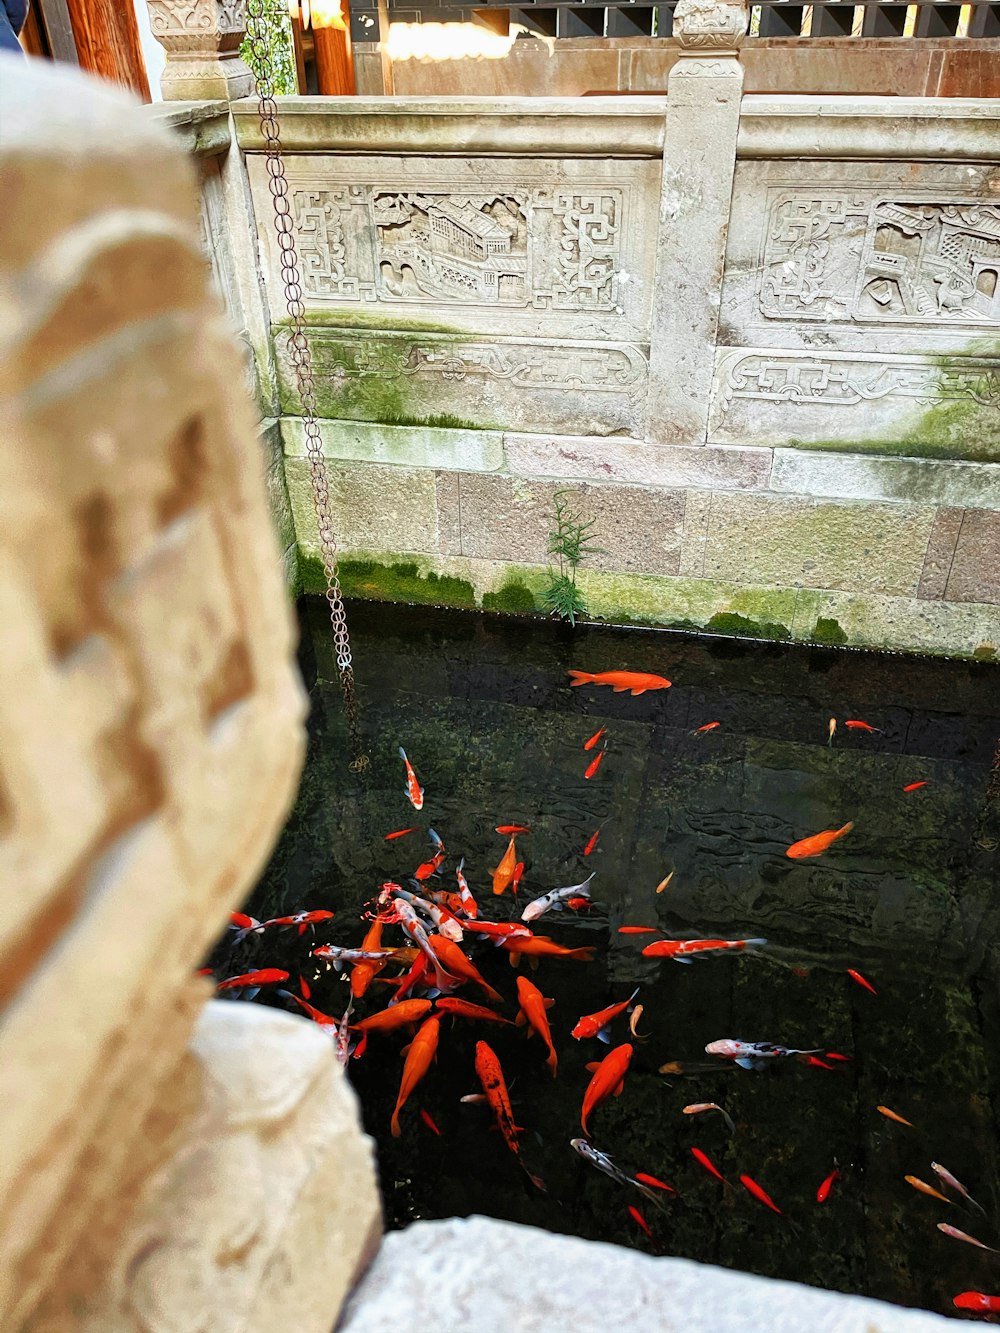 a group of fish swimming in a small pond